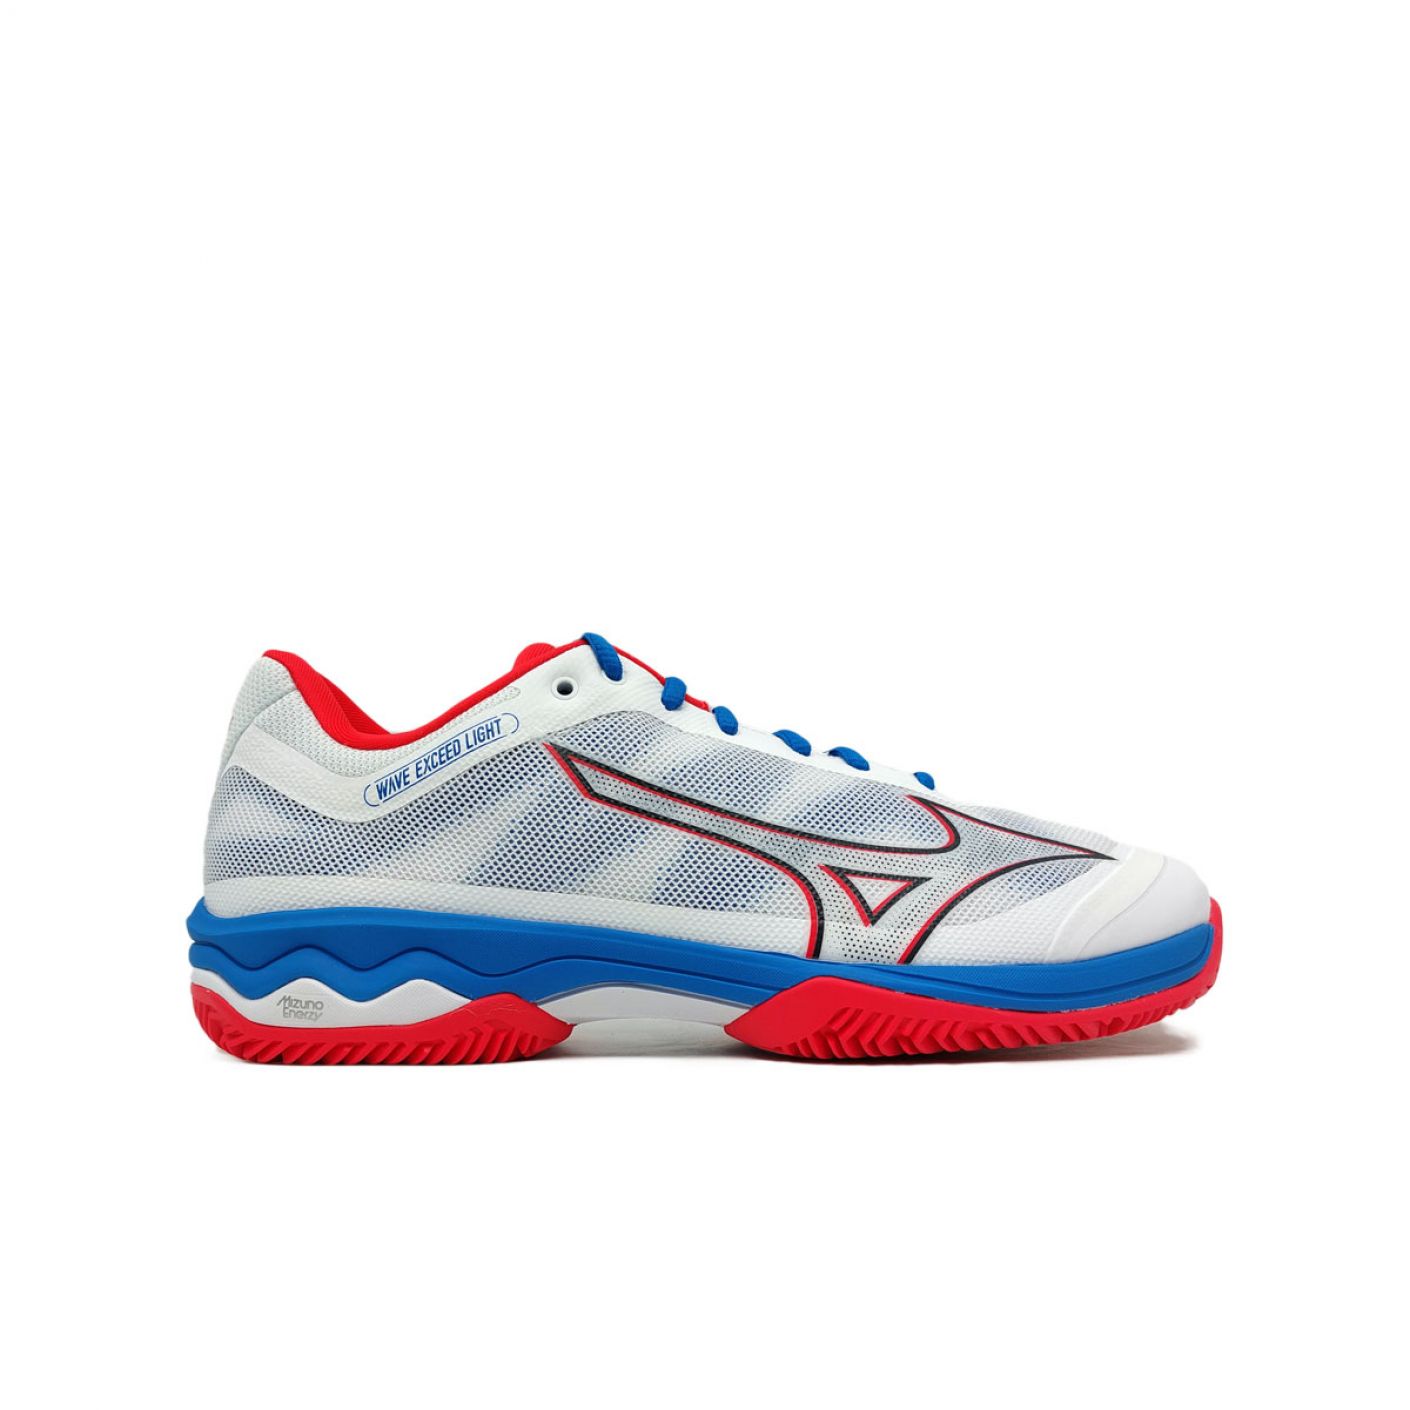 Mizuno Wave Exceed Light Padel White/Red